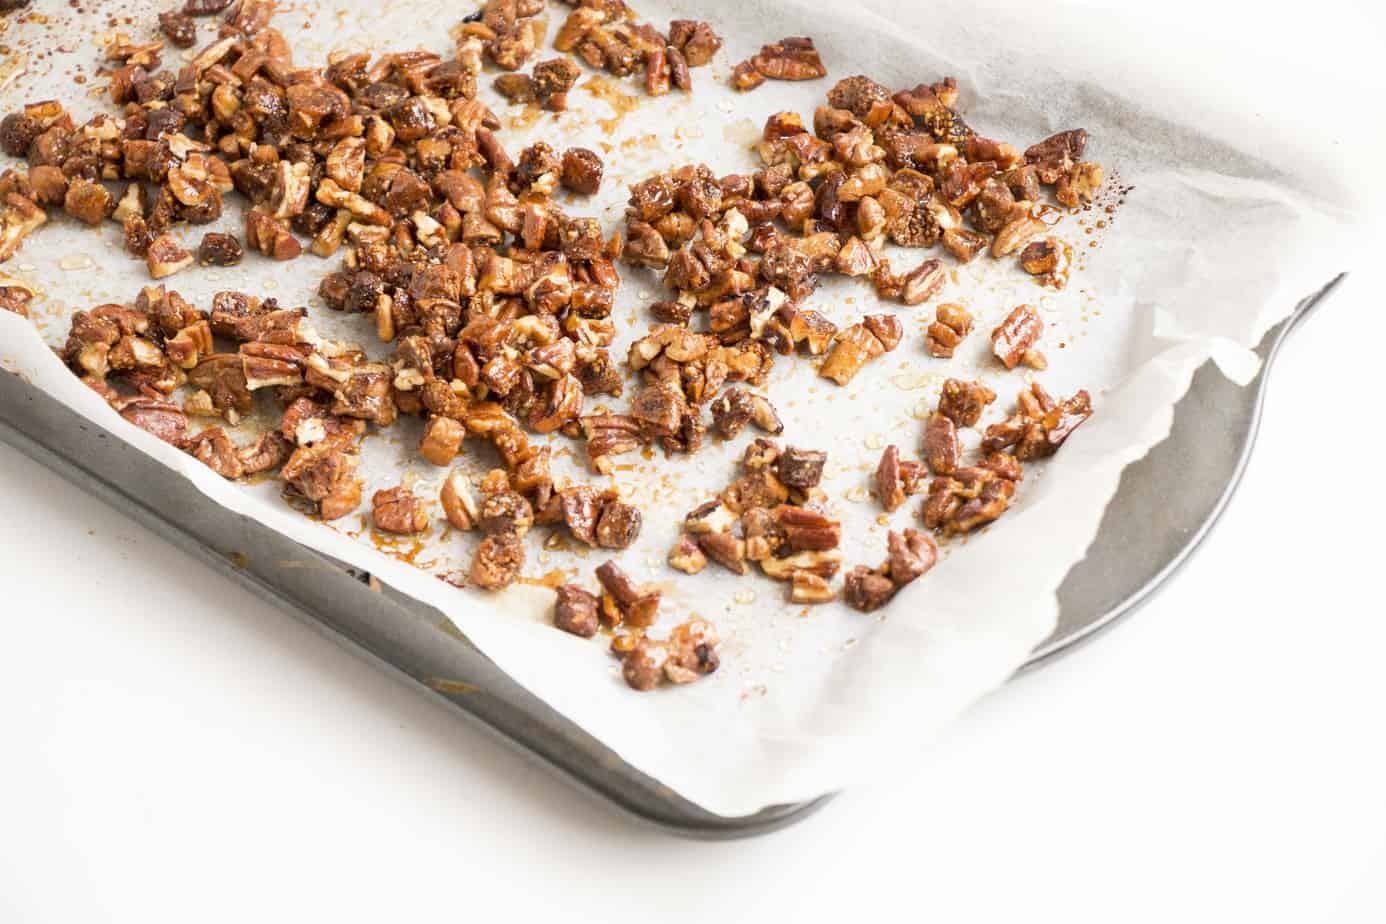 Chopped nuts on a baking tray.